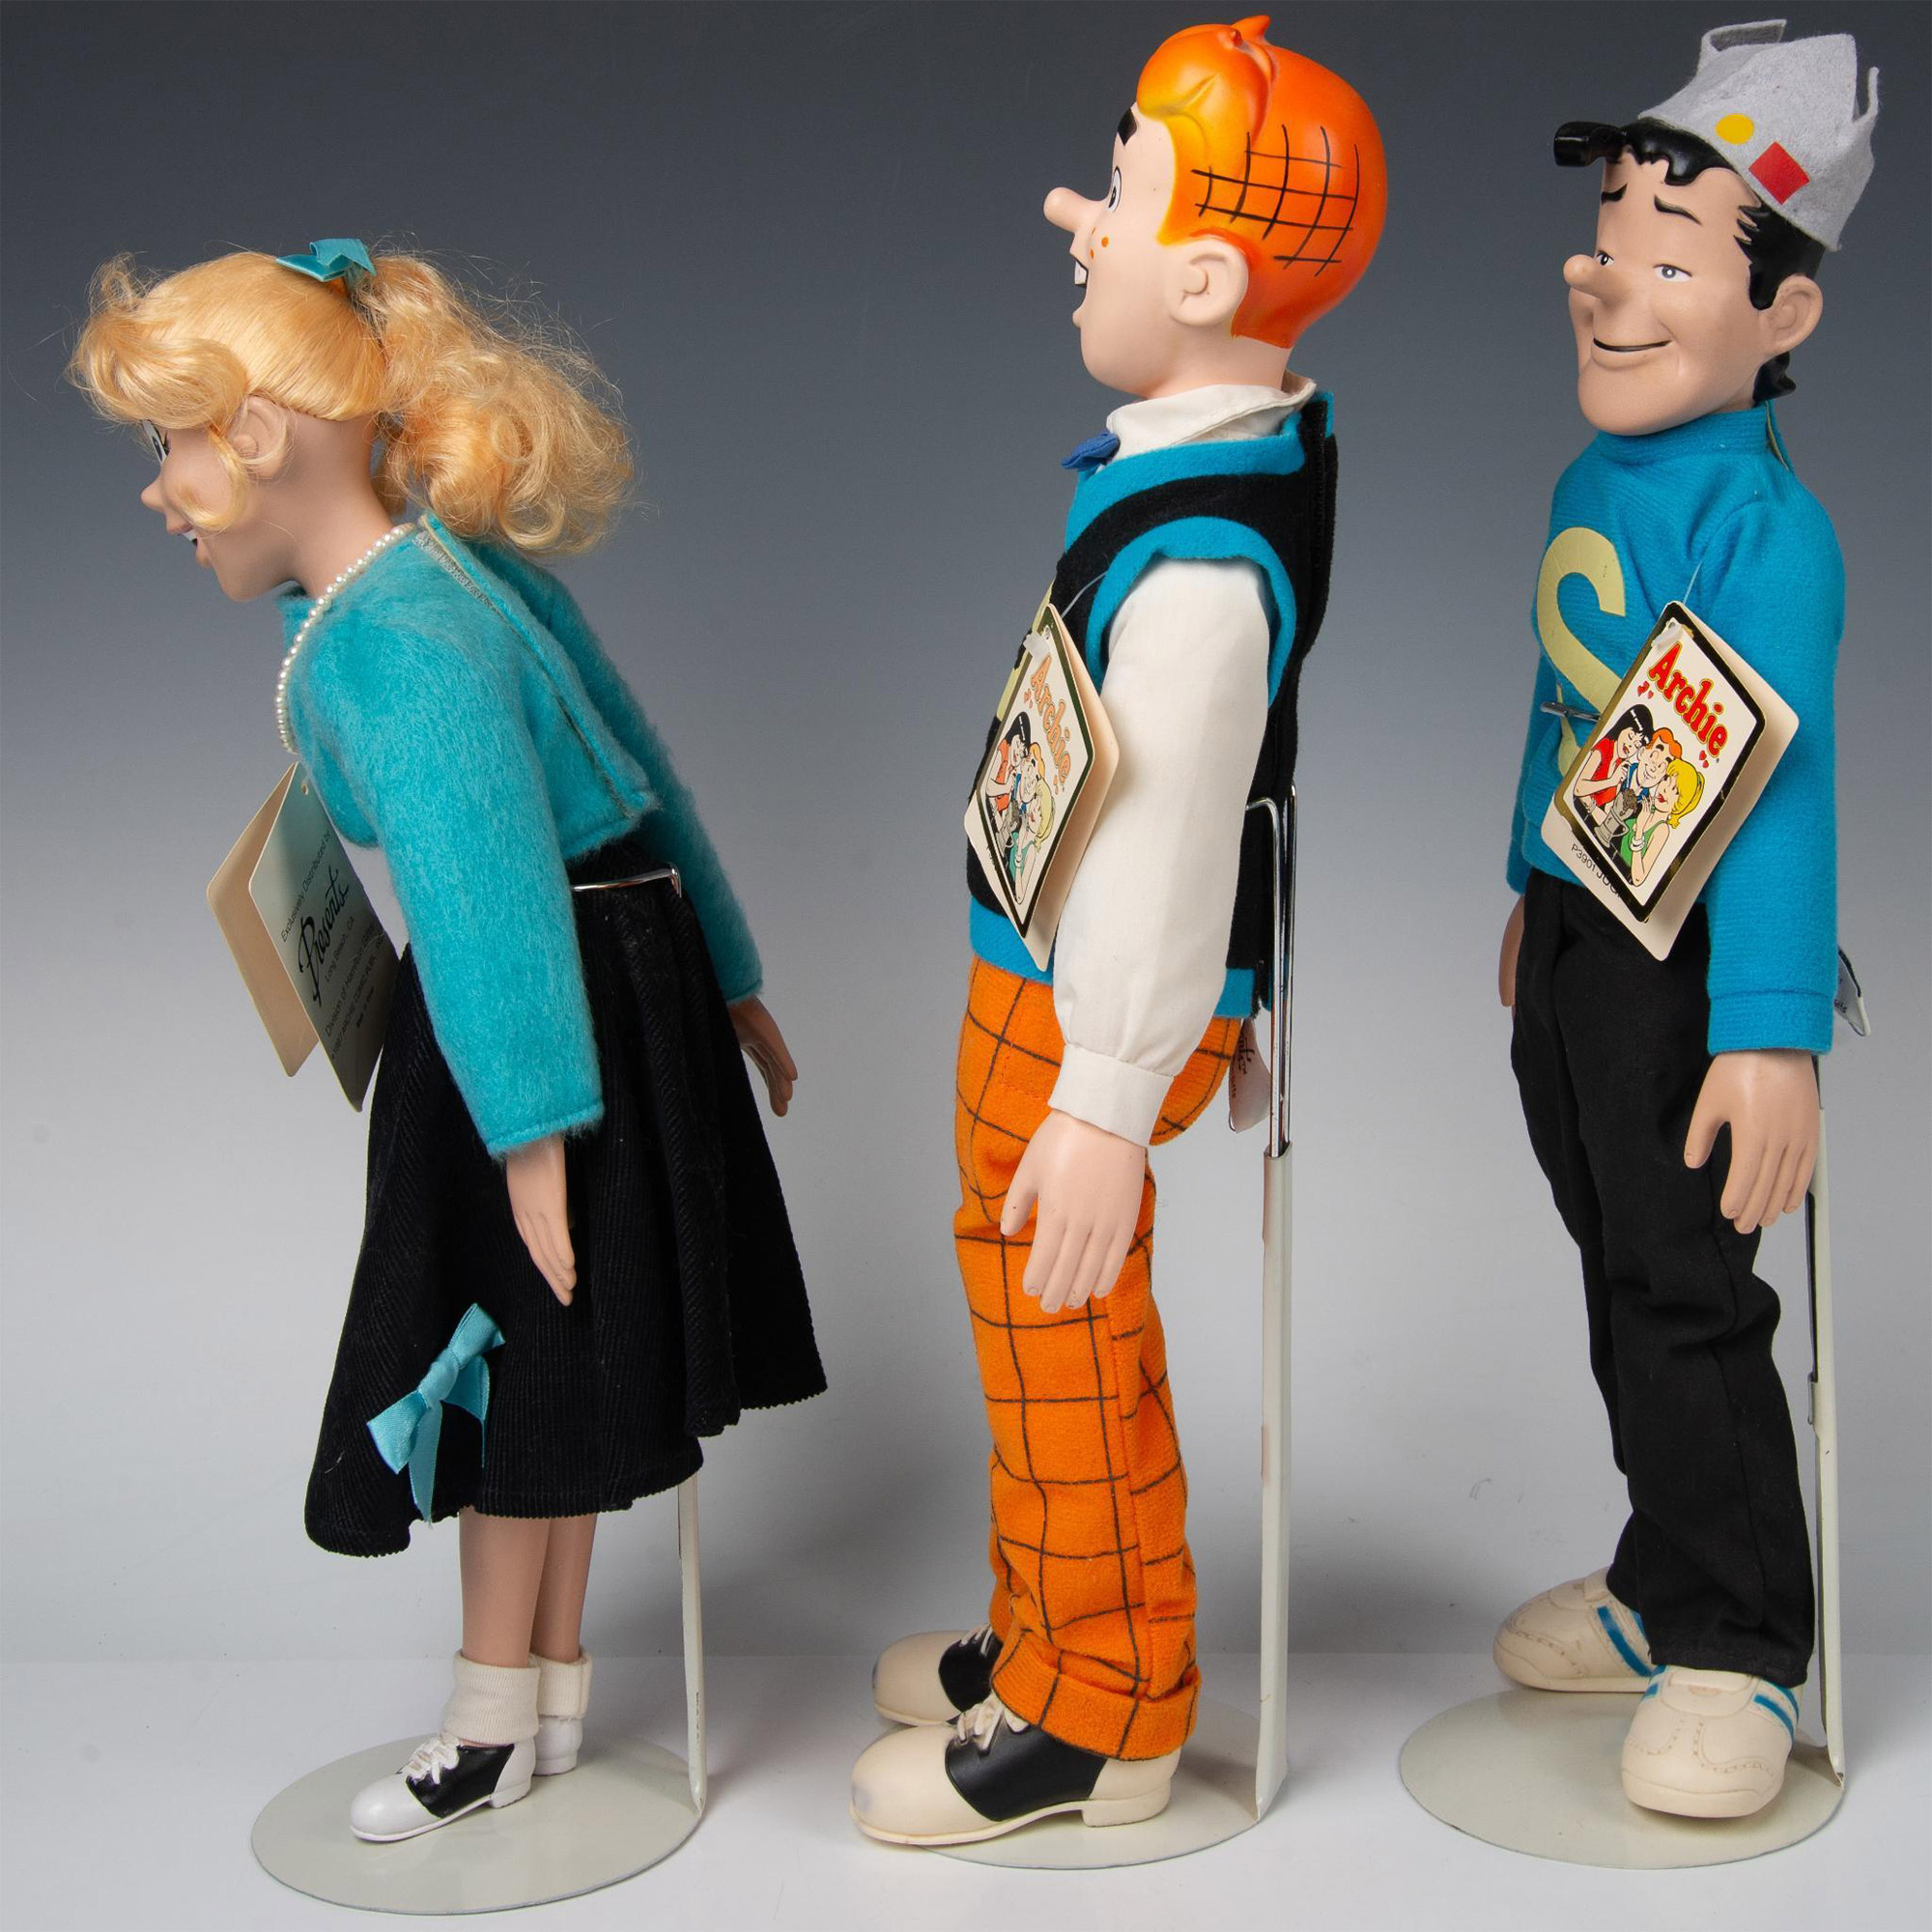 Hamilton Gifts Presents Doll Set, Archie Comics Characters - Image 4 of 10